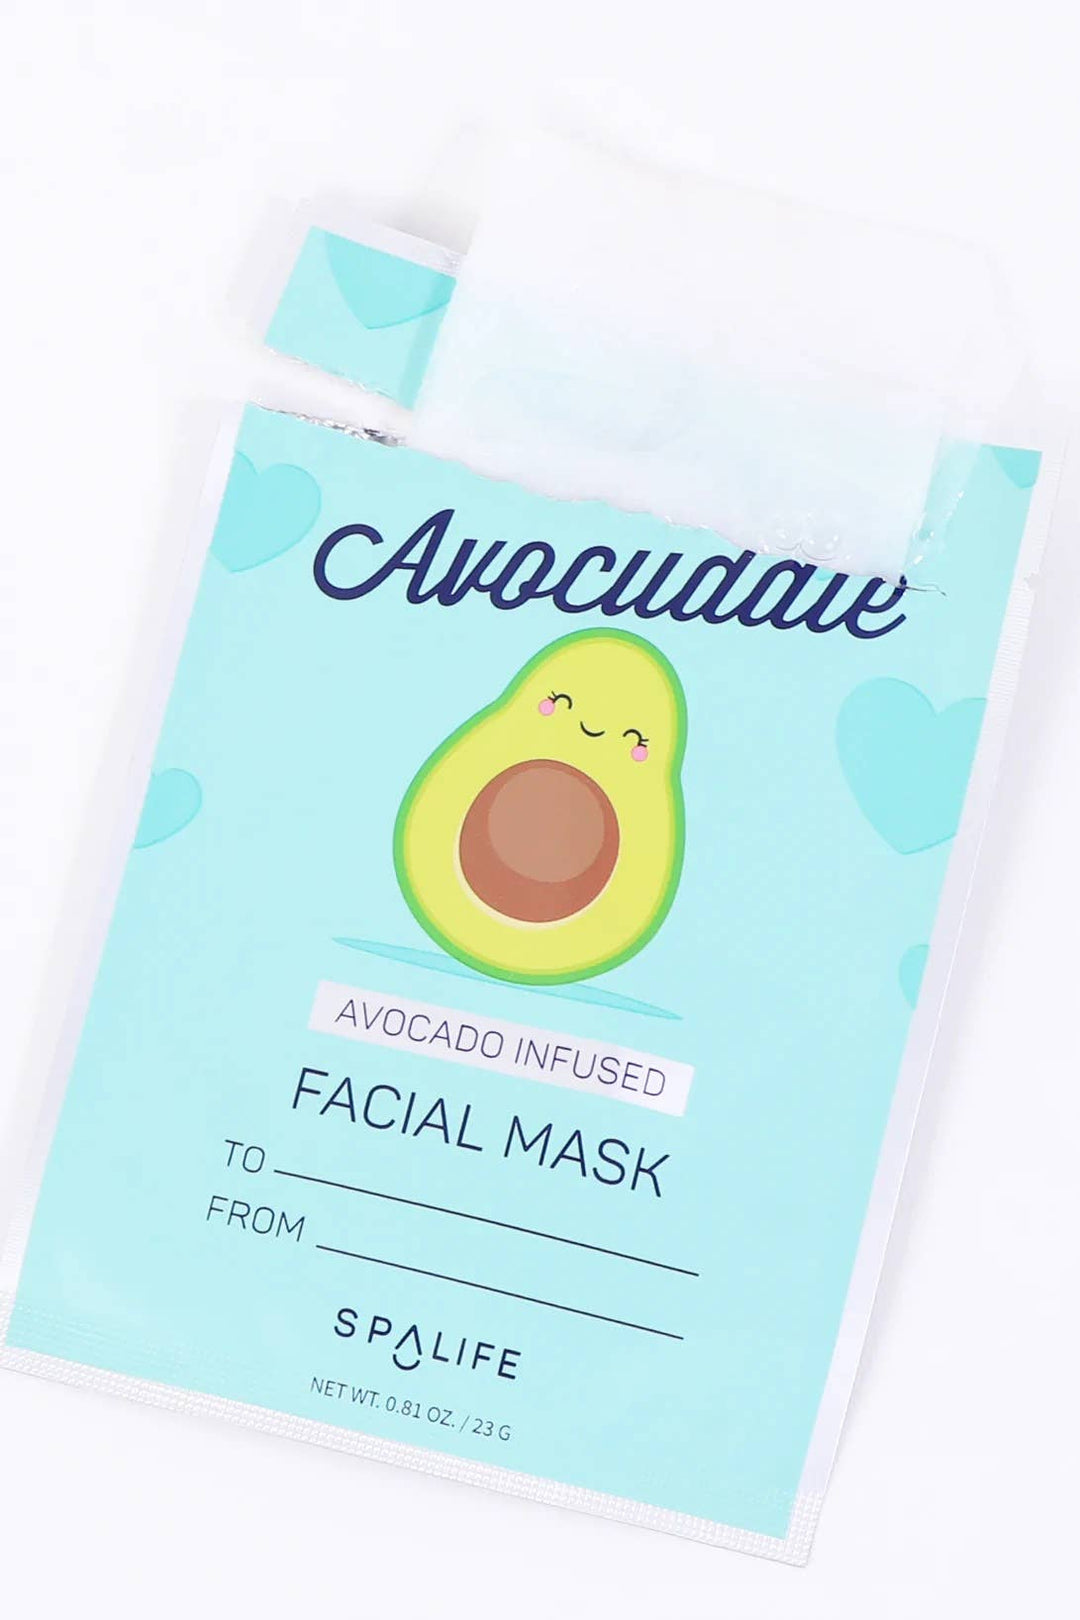 Let's Avocuddle - Avocado Infused Facial Mask